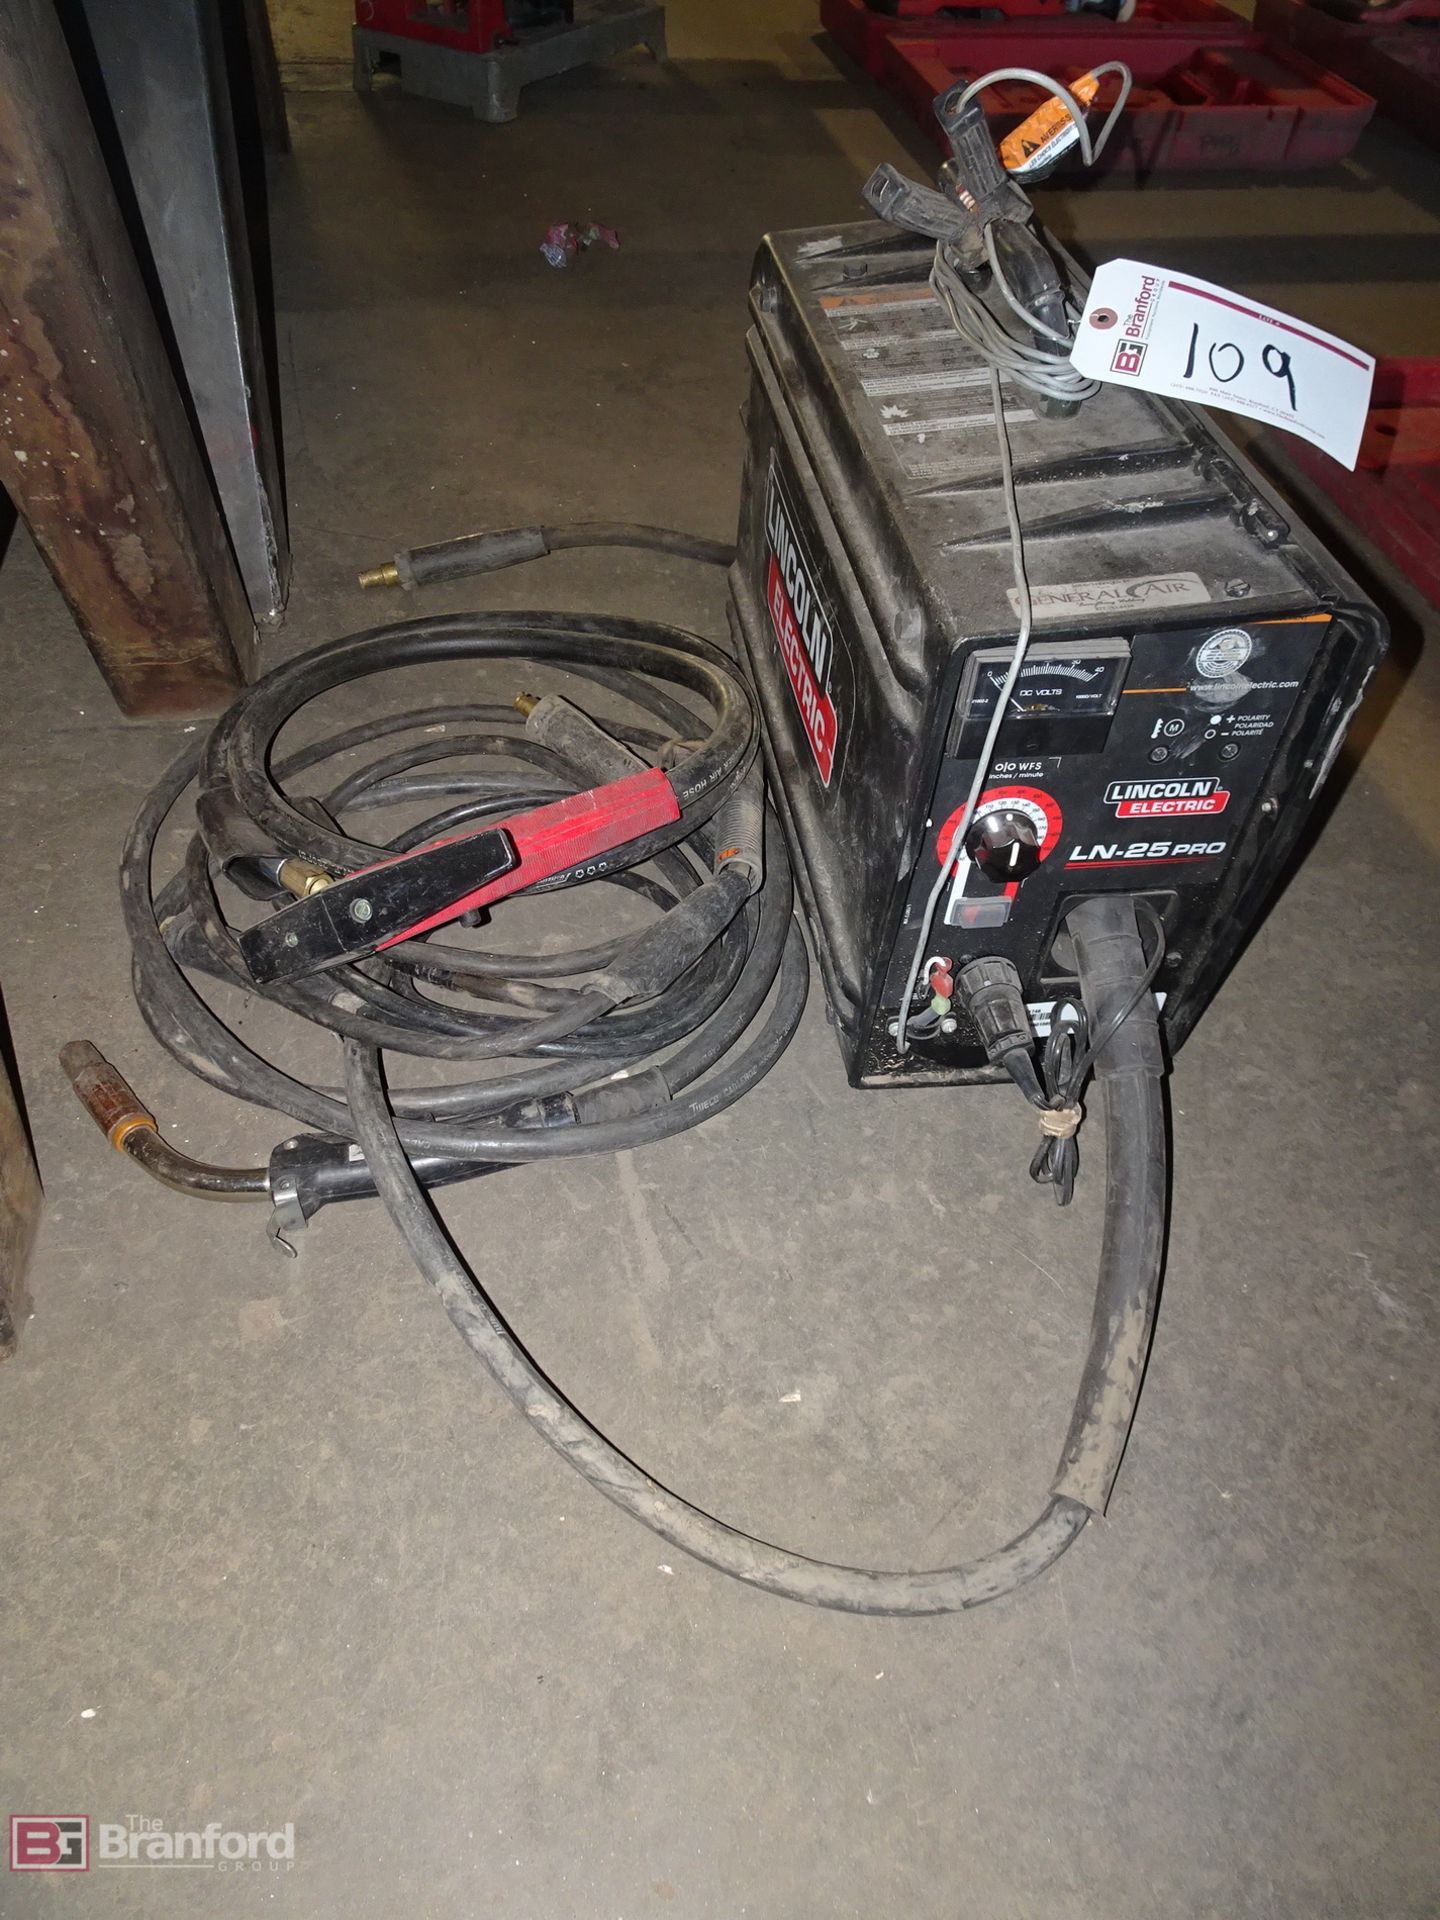 Lincoln Electric Model LN-25 Pro, Hand Carry Welding System